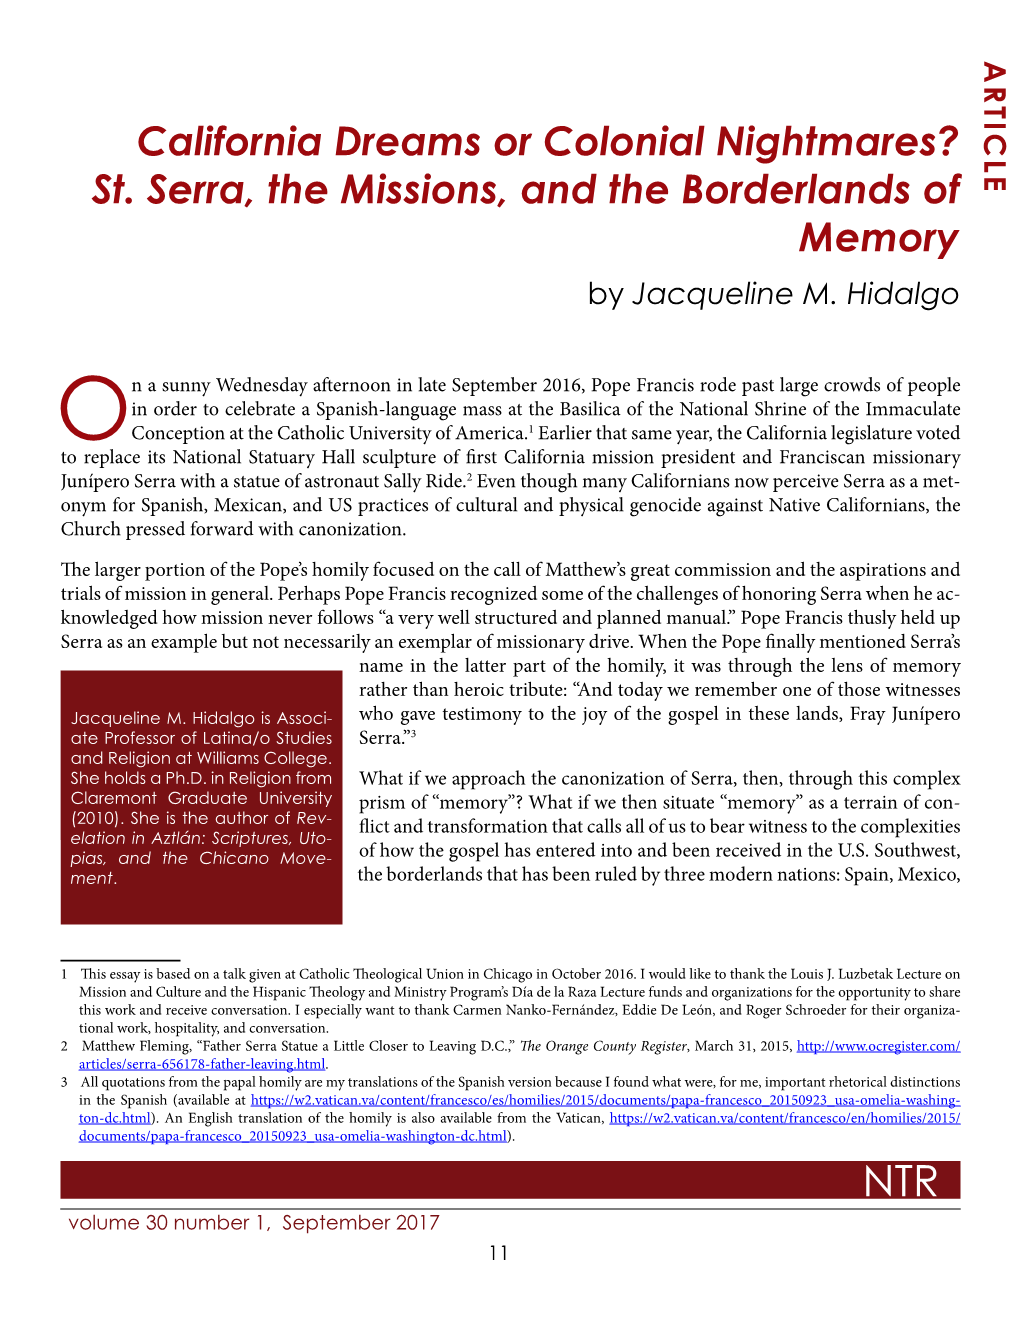 St. Serra, the Missions, and the Borderlands of Memory